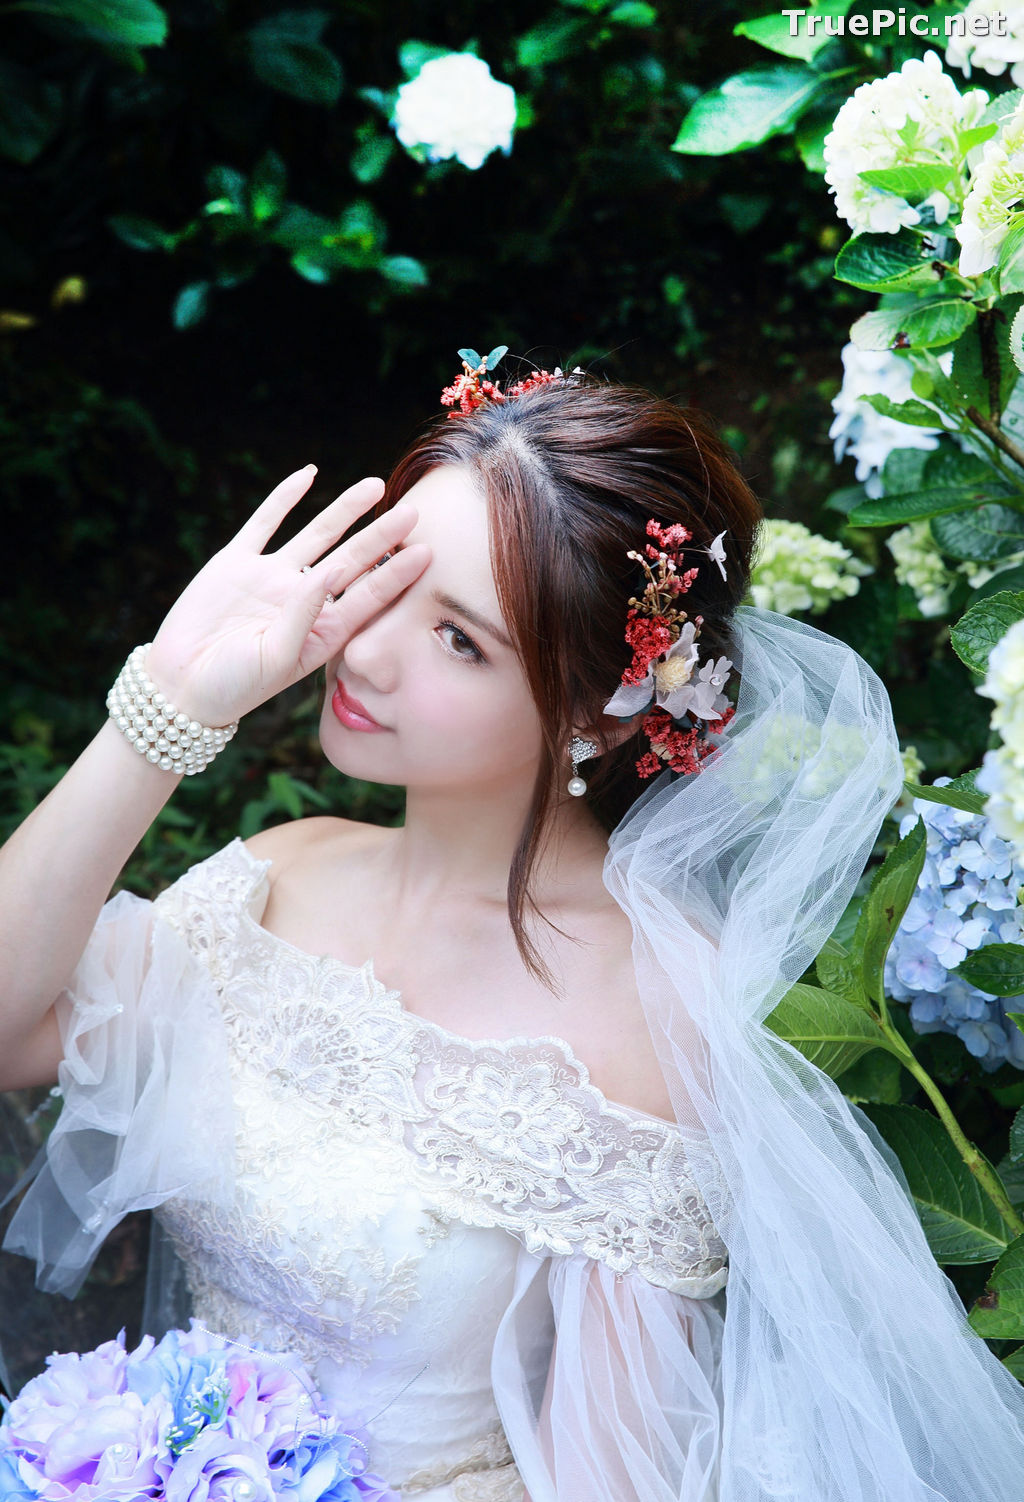 Image Taiwanese Model - 張倫甄 - Beautiful Bride and Hydrangea Flowers - TruePic.net - Picture-39